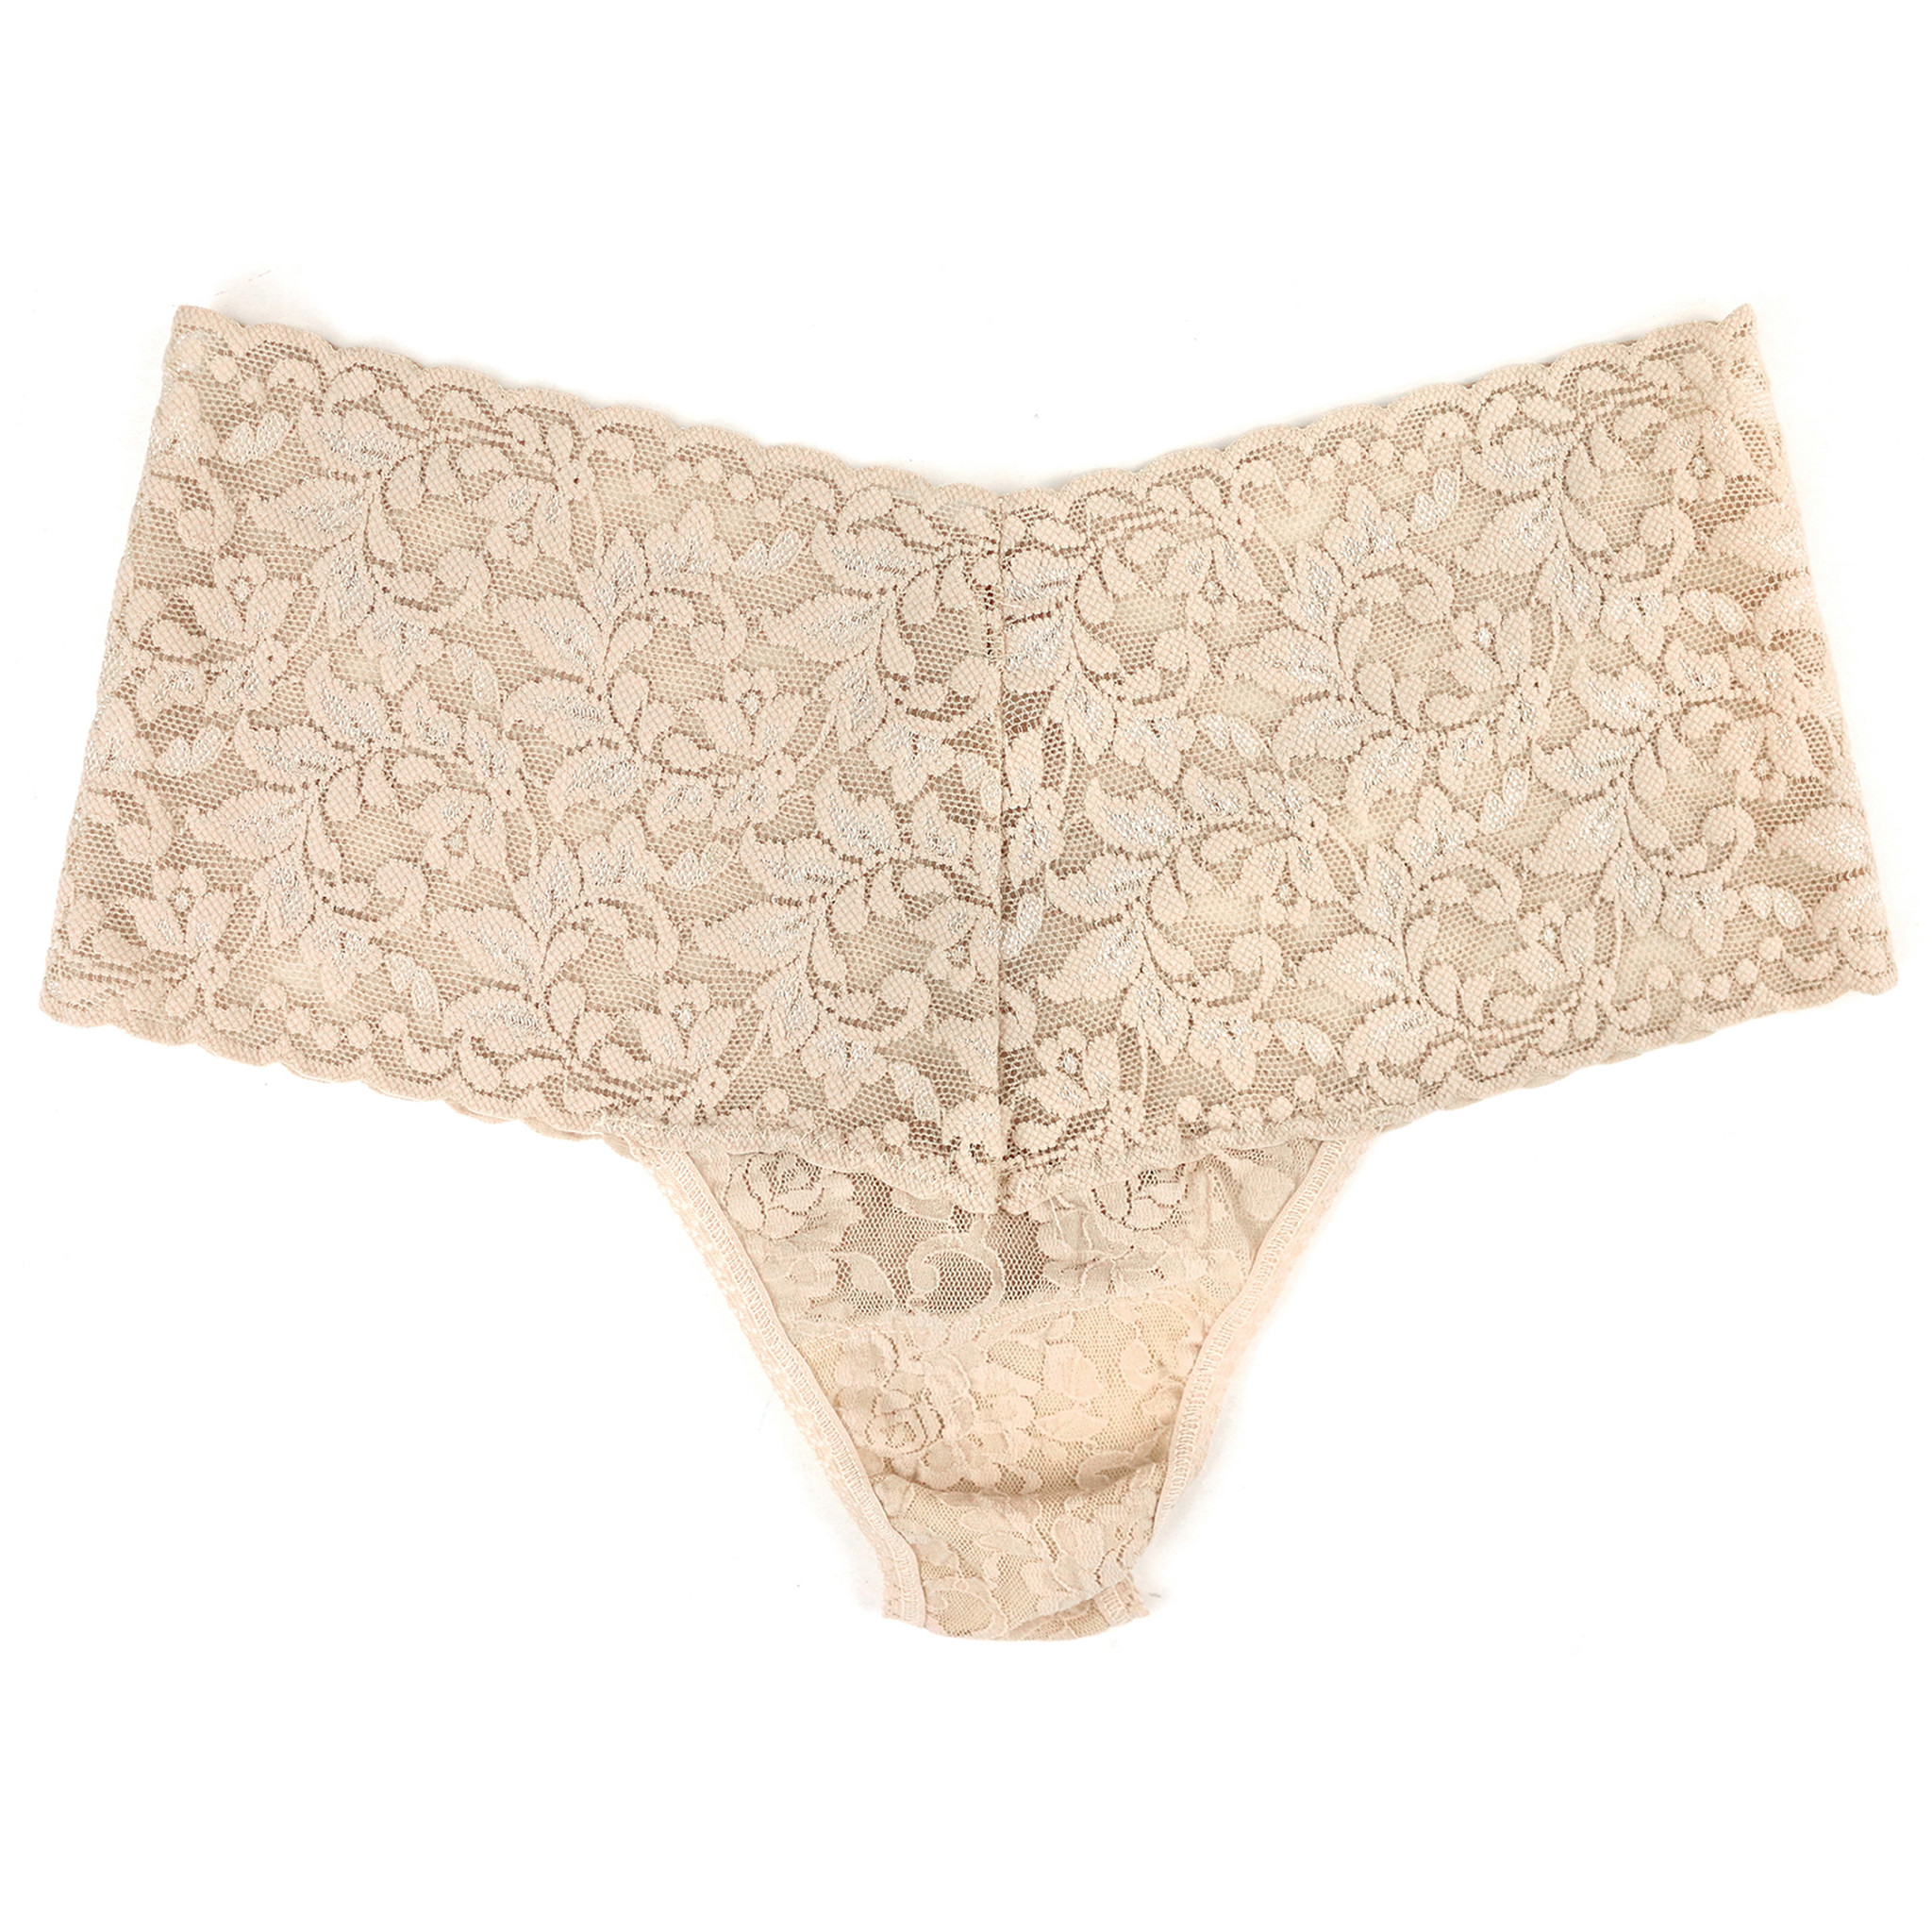 Still Going Strong ~ Hanky Panky's Iconic Thong Turns 35